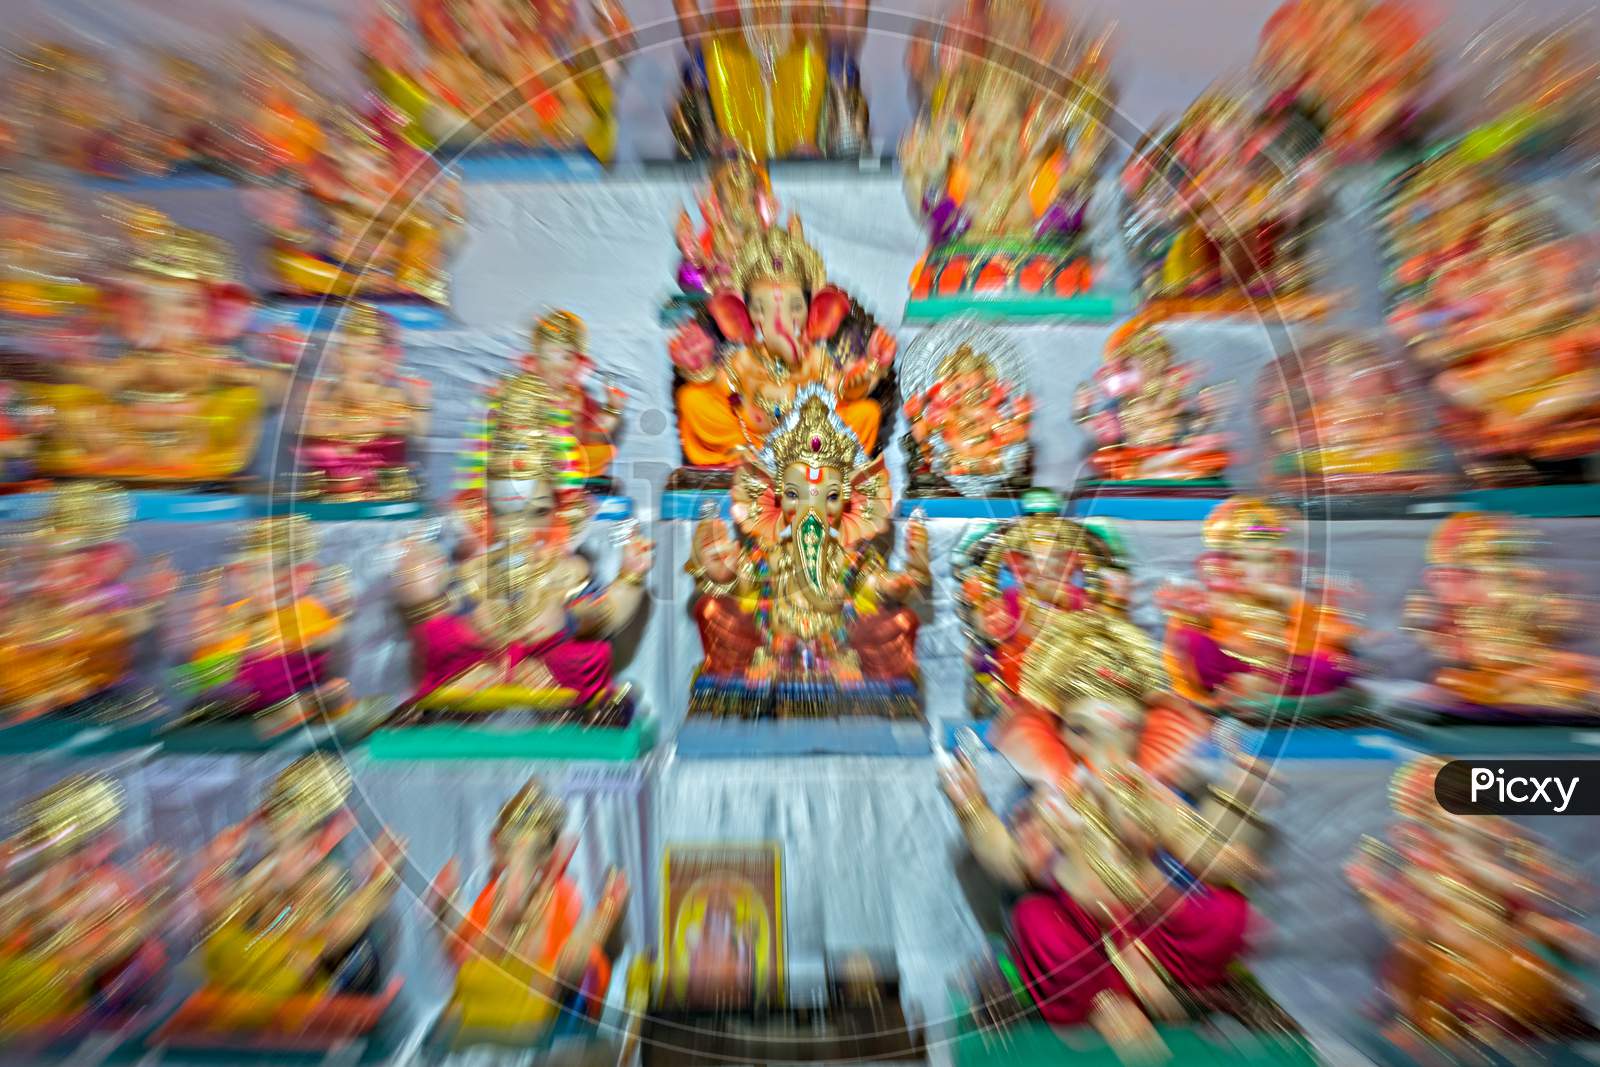 Zoom Burst Photograph Of Lord Ganesh Idol In The Center Of Idols In A Shop.